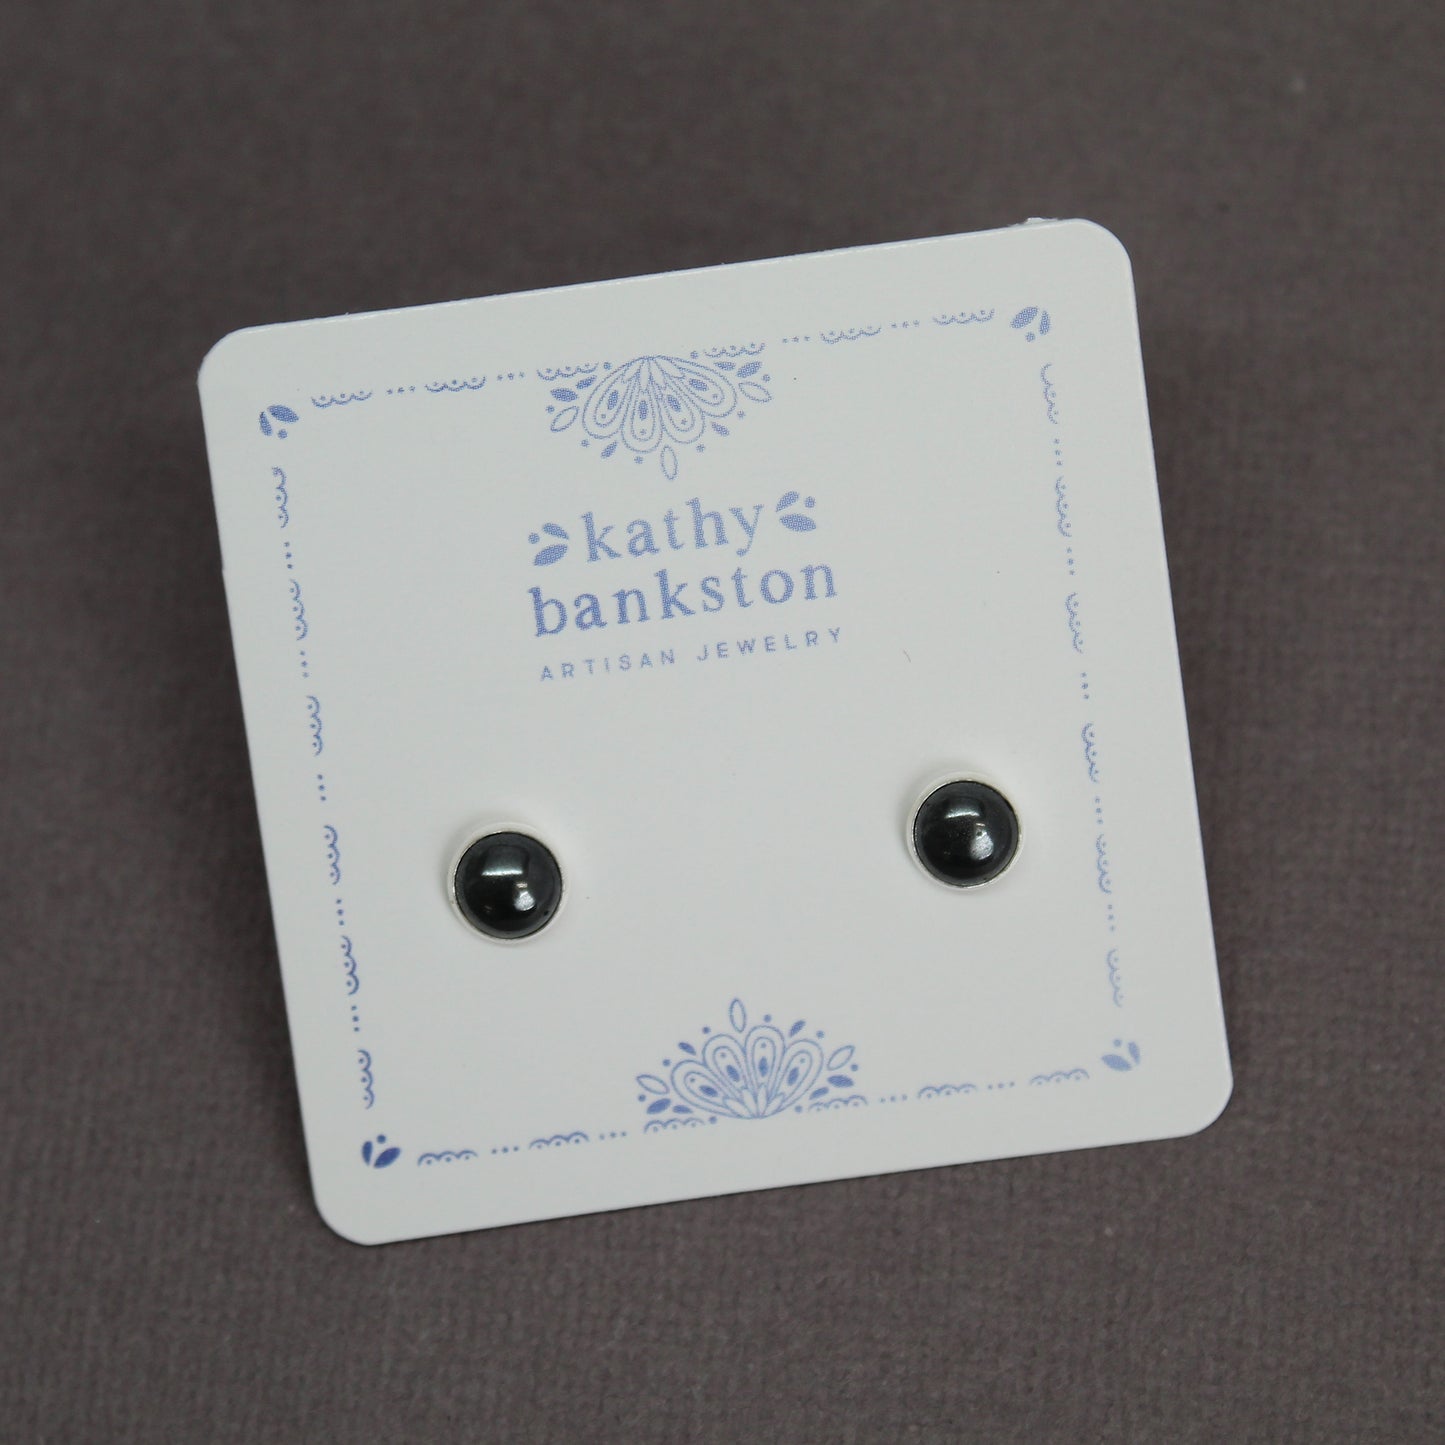 Load image into Gallery viewer, 6mm Hematite Studs in Sterling Silver 
